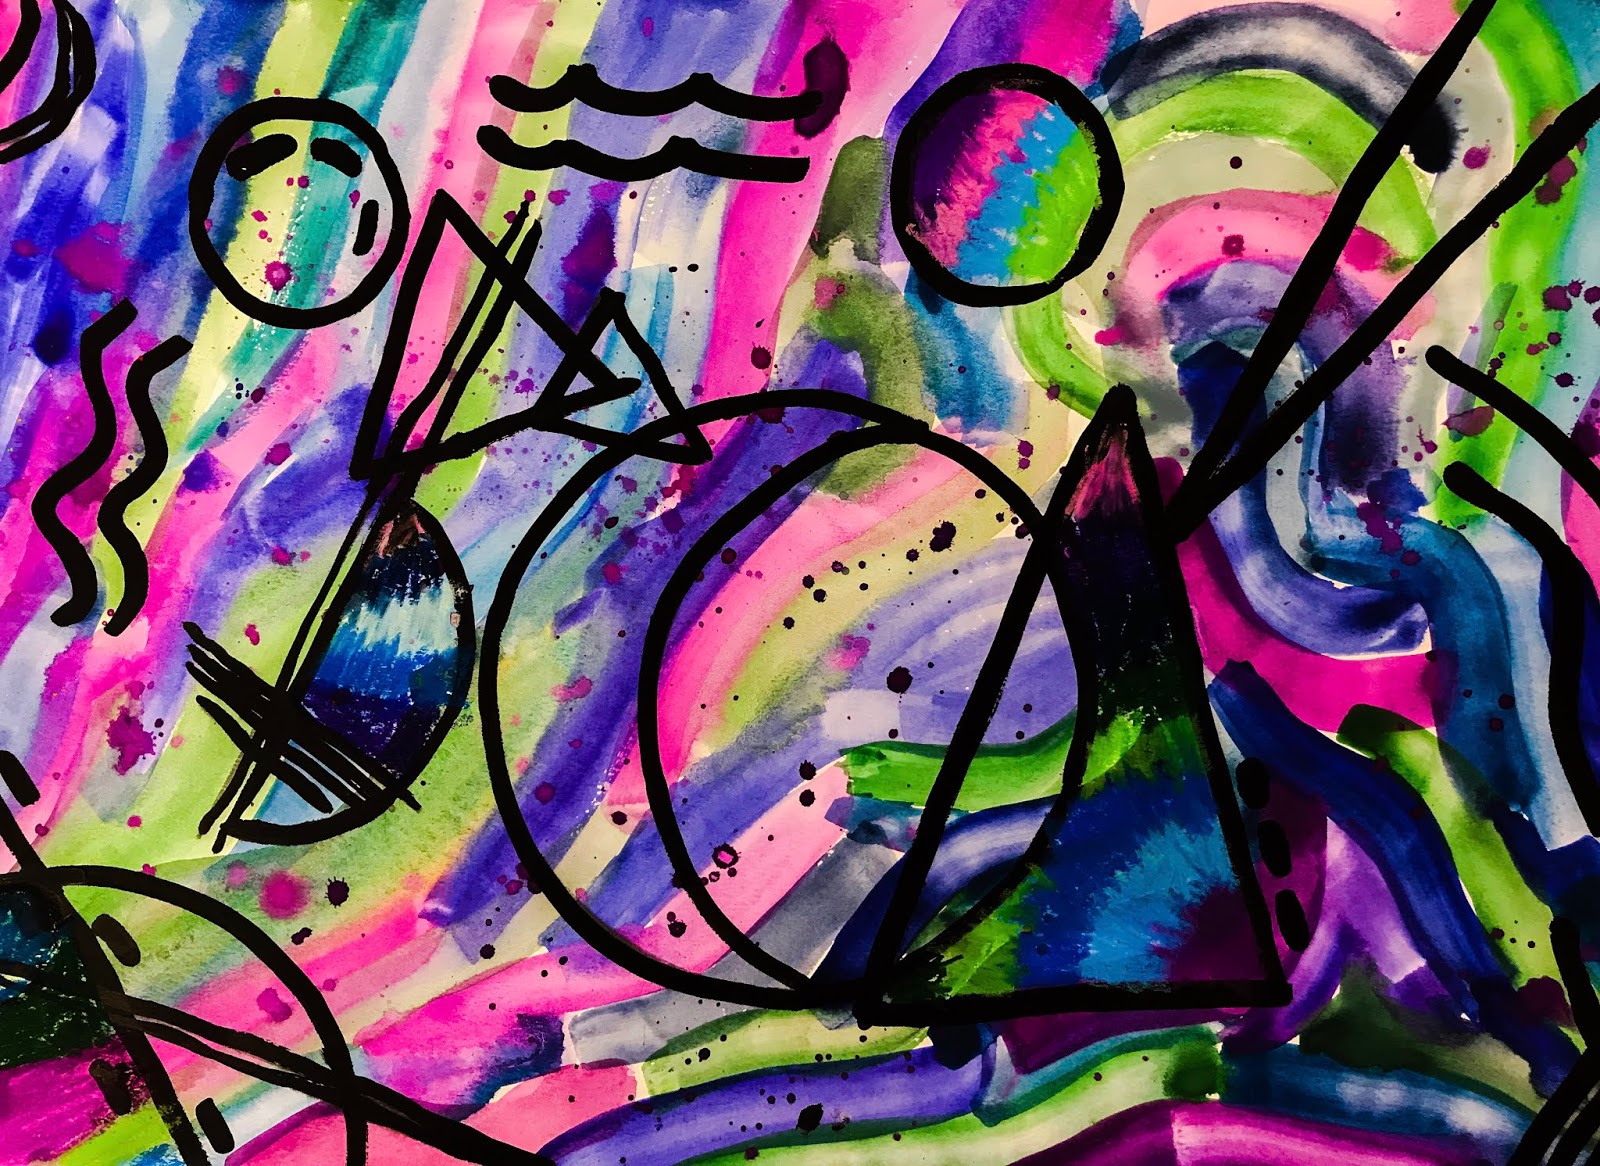 oil pastel lilac blue green red pink, crayons abstract freehand